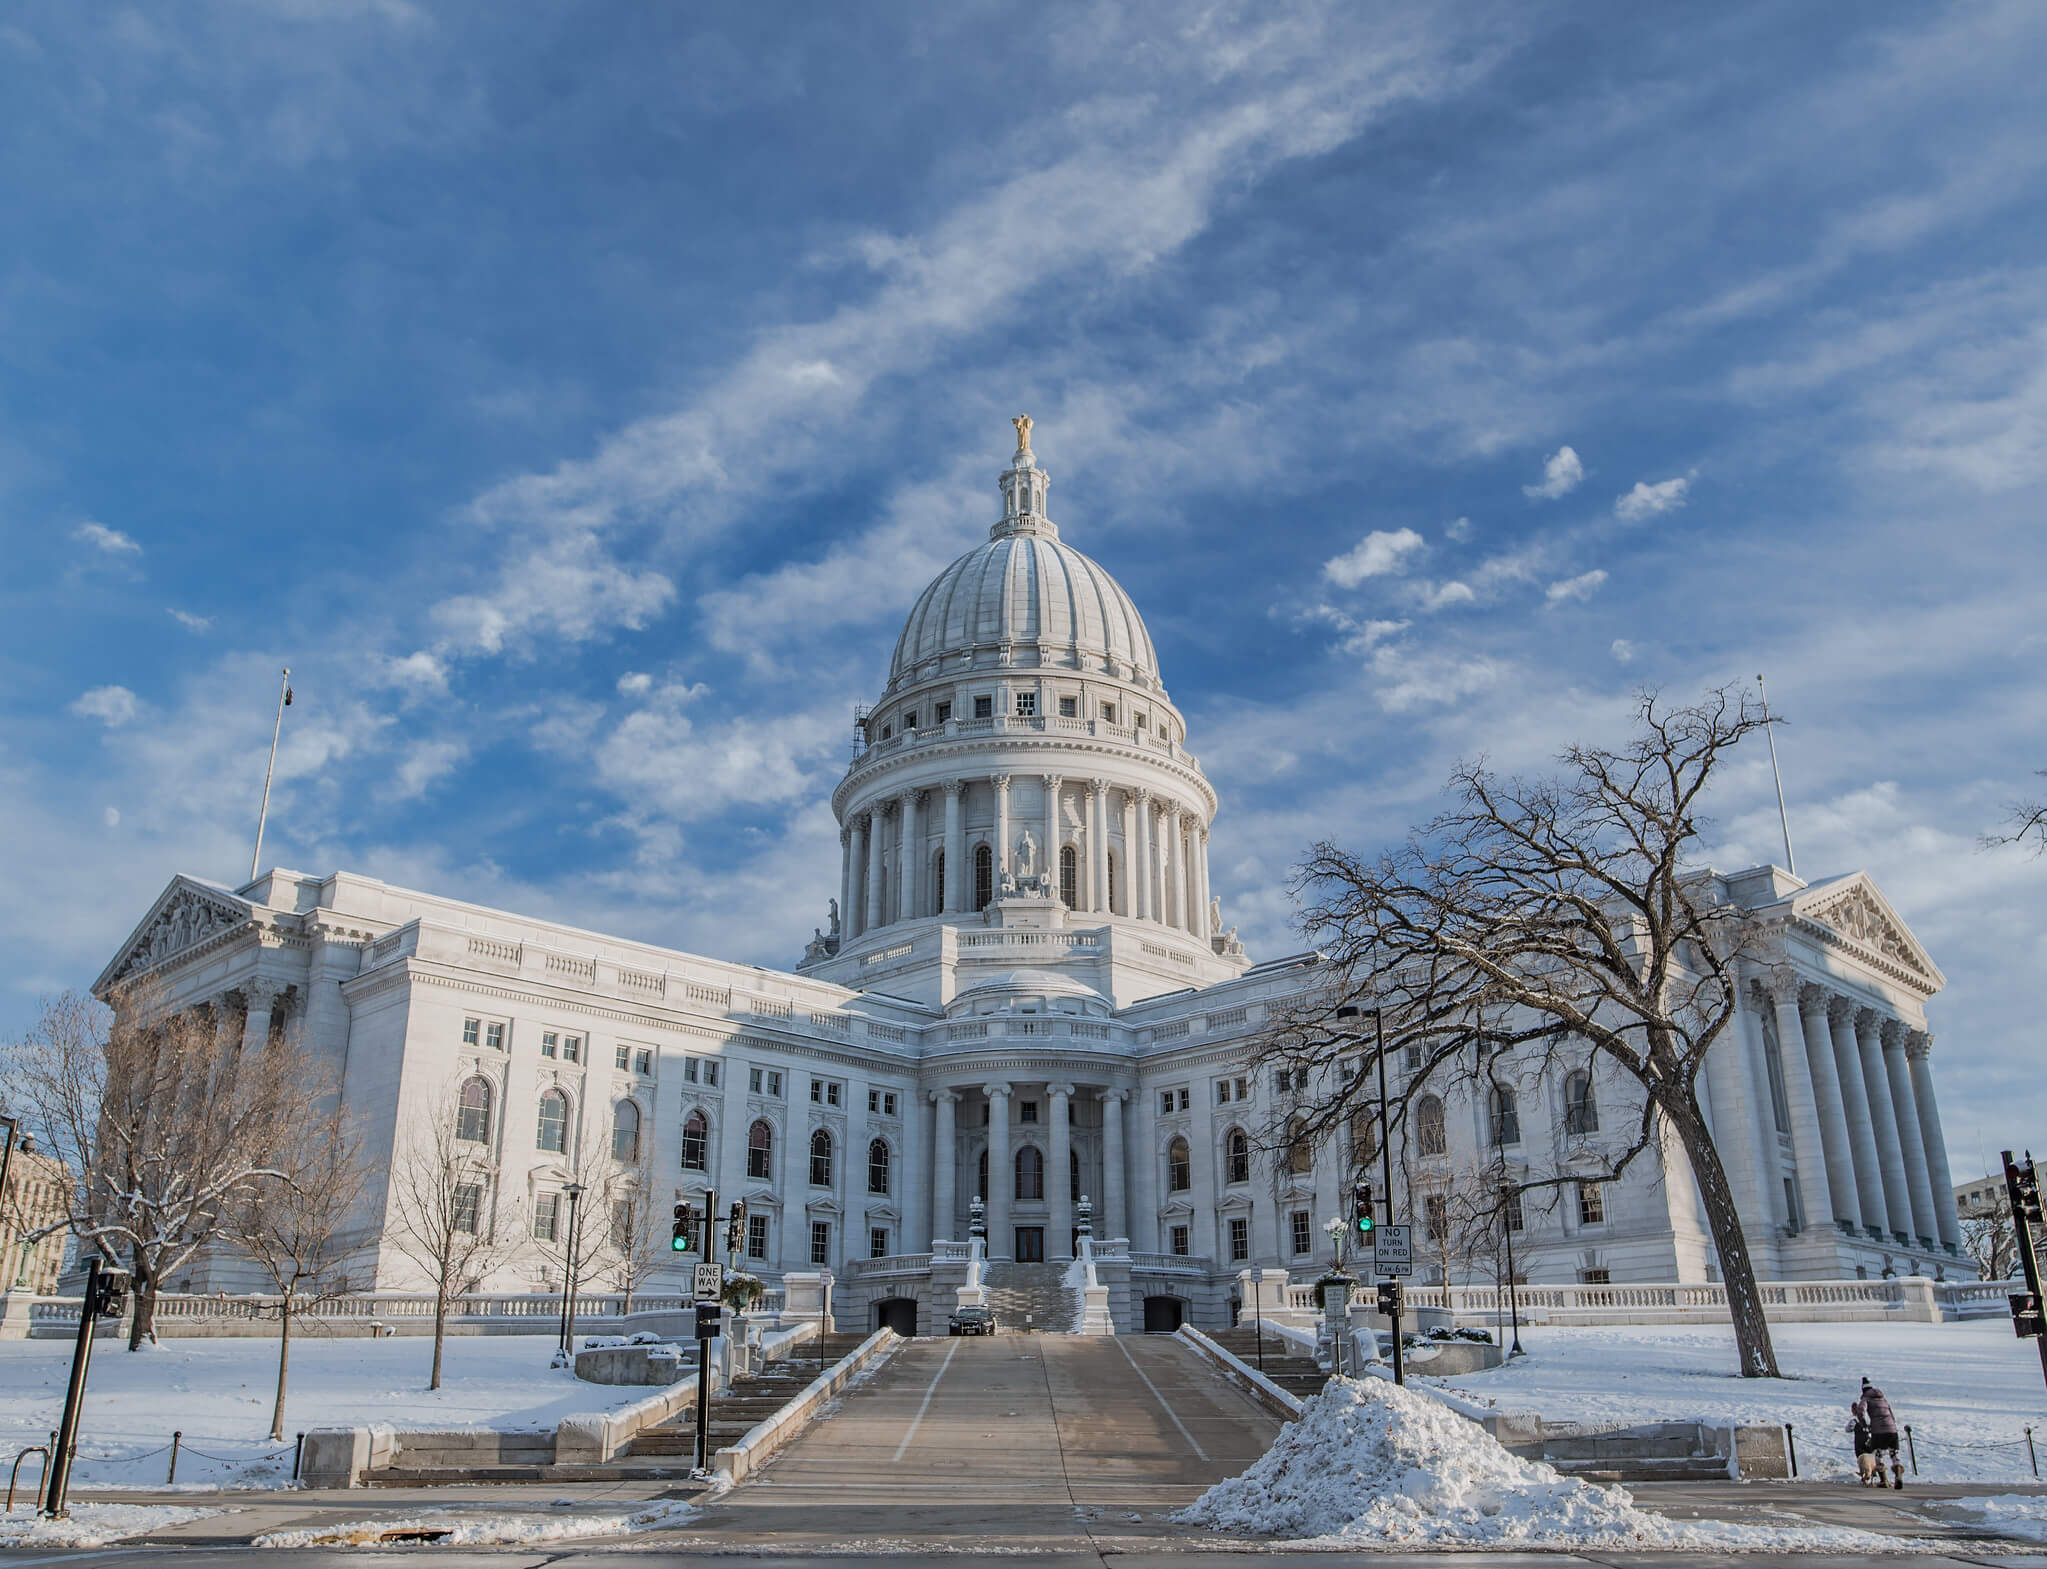 Wisconsin state capitol building in winter with snow covered grass and the looming white building in the back,